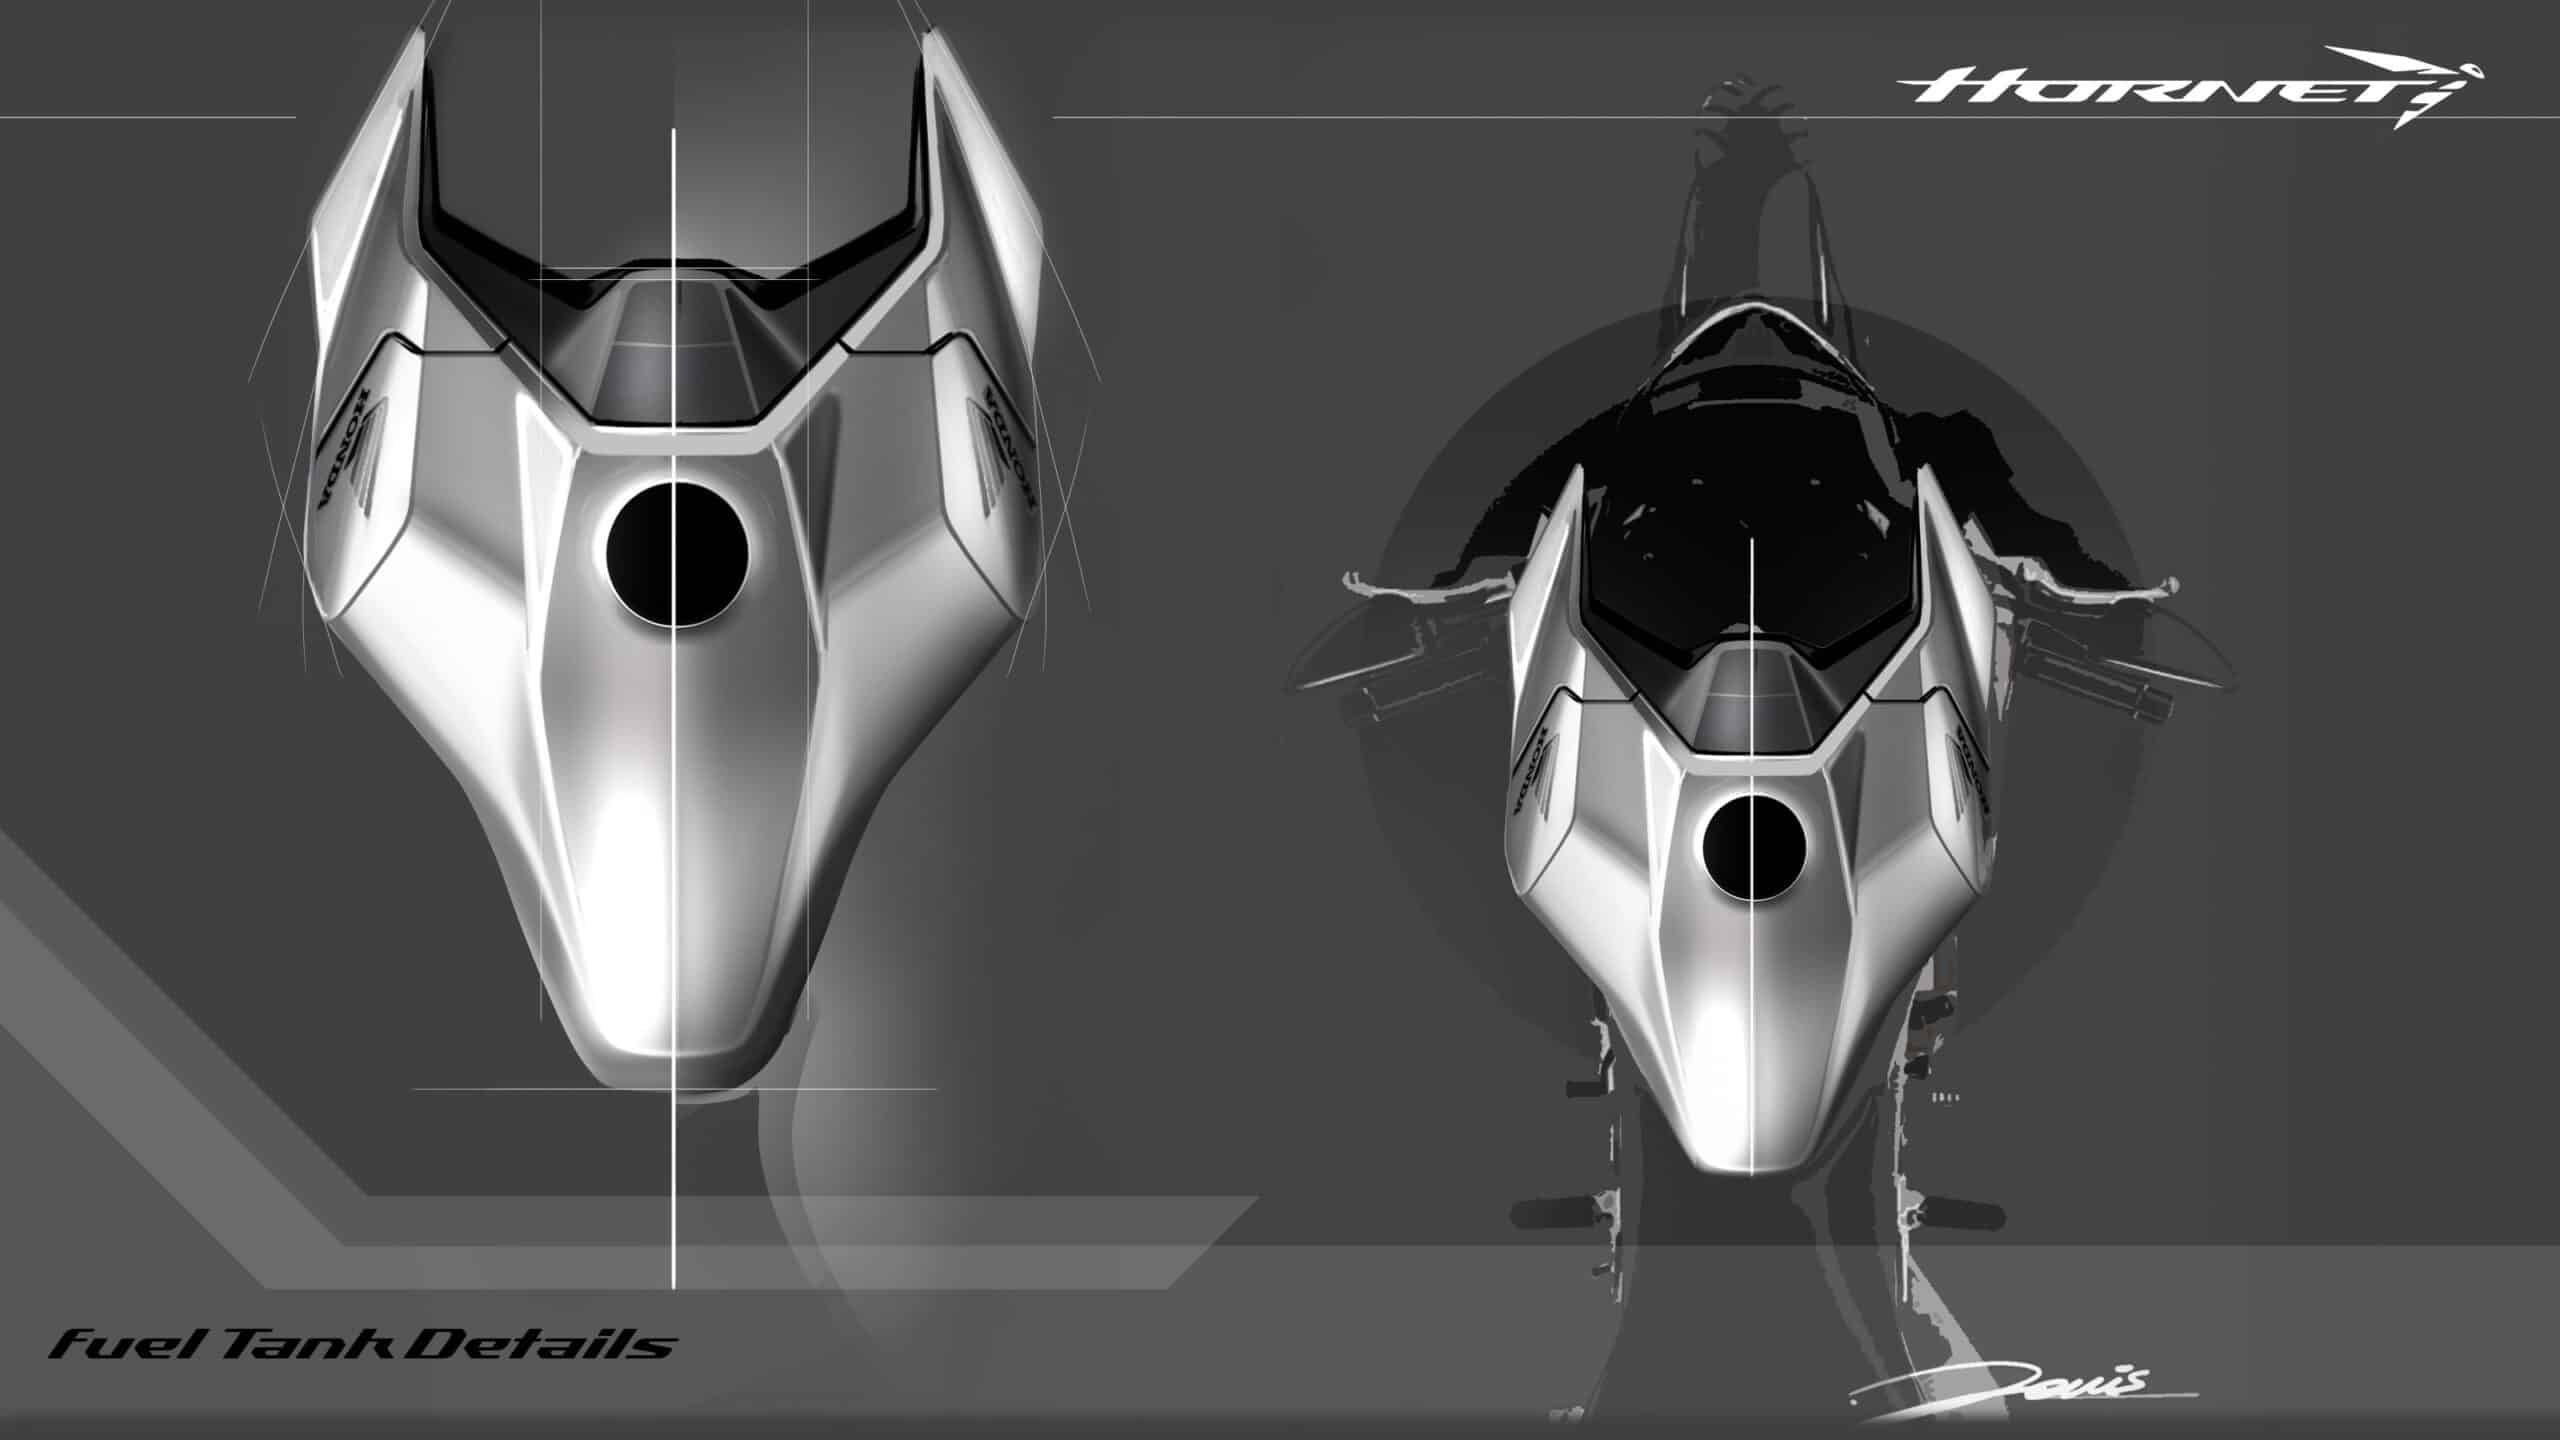 371425 New Hornet design concept sketches hint at the sting in its tail scaled - Moto Honda Motopel